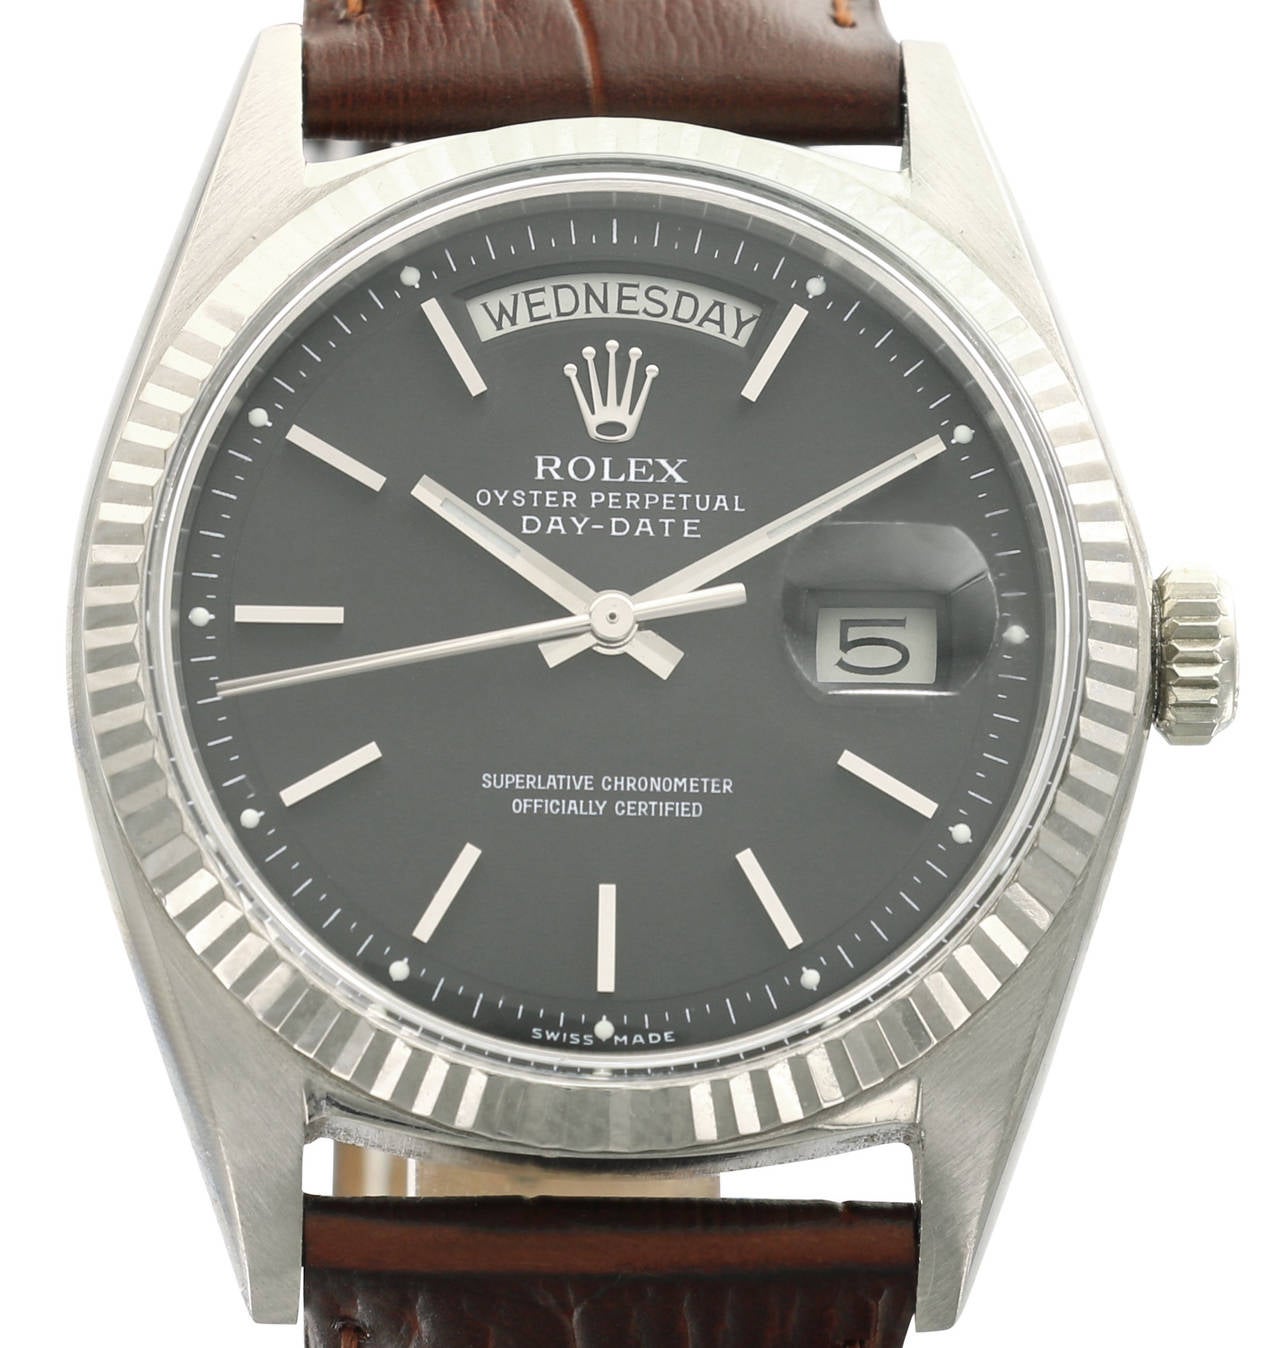 This white gold Rolex Day-Date features a beautiful black dial, high quality crocodile strap and original Rolex buckle. The serial number is 1,06X,XXX.